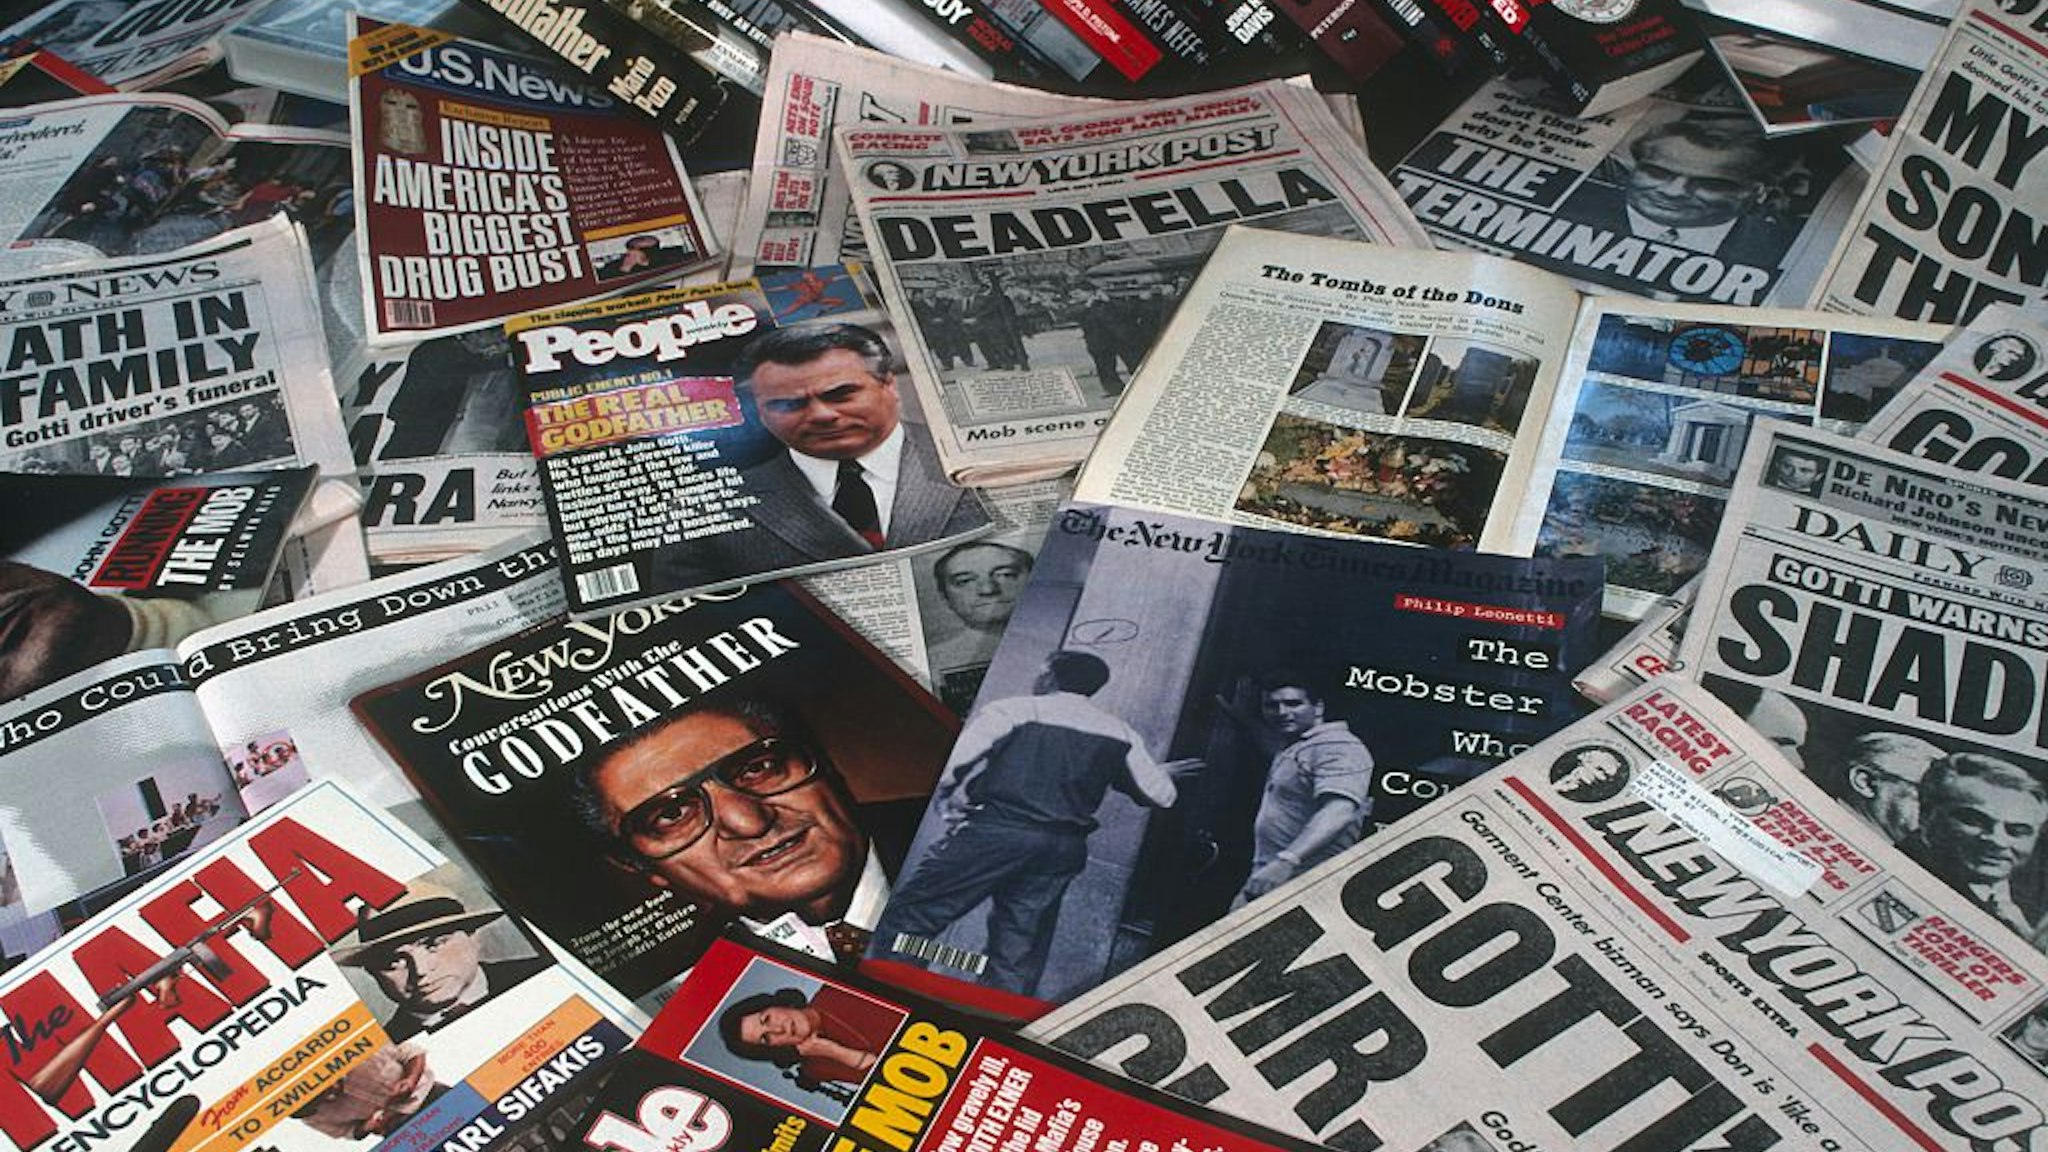 NEW YORK, NY - JUNE 1: Newspapers and Magazines about Mafia on June 1, 1991 in New York, New York. (Photo by Santi Visalli/Getty Images)